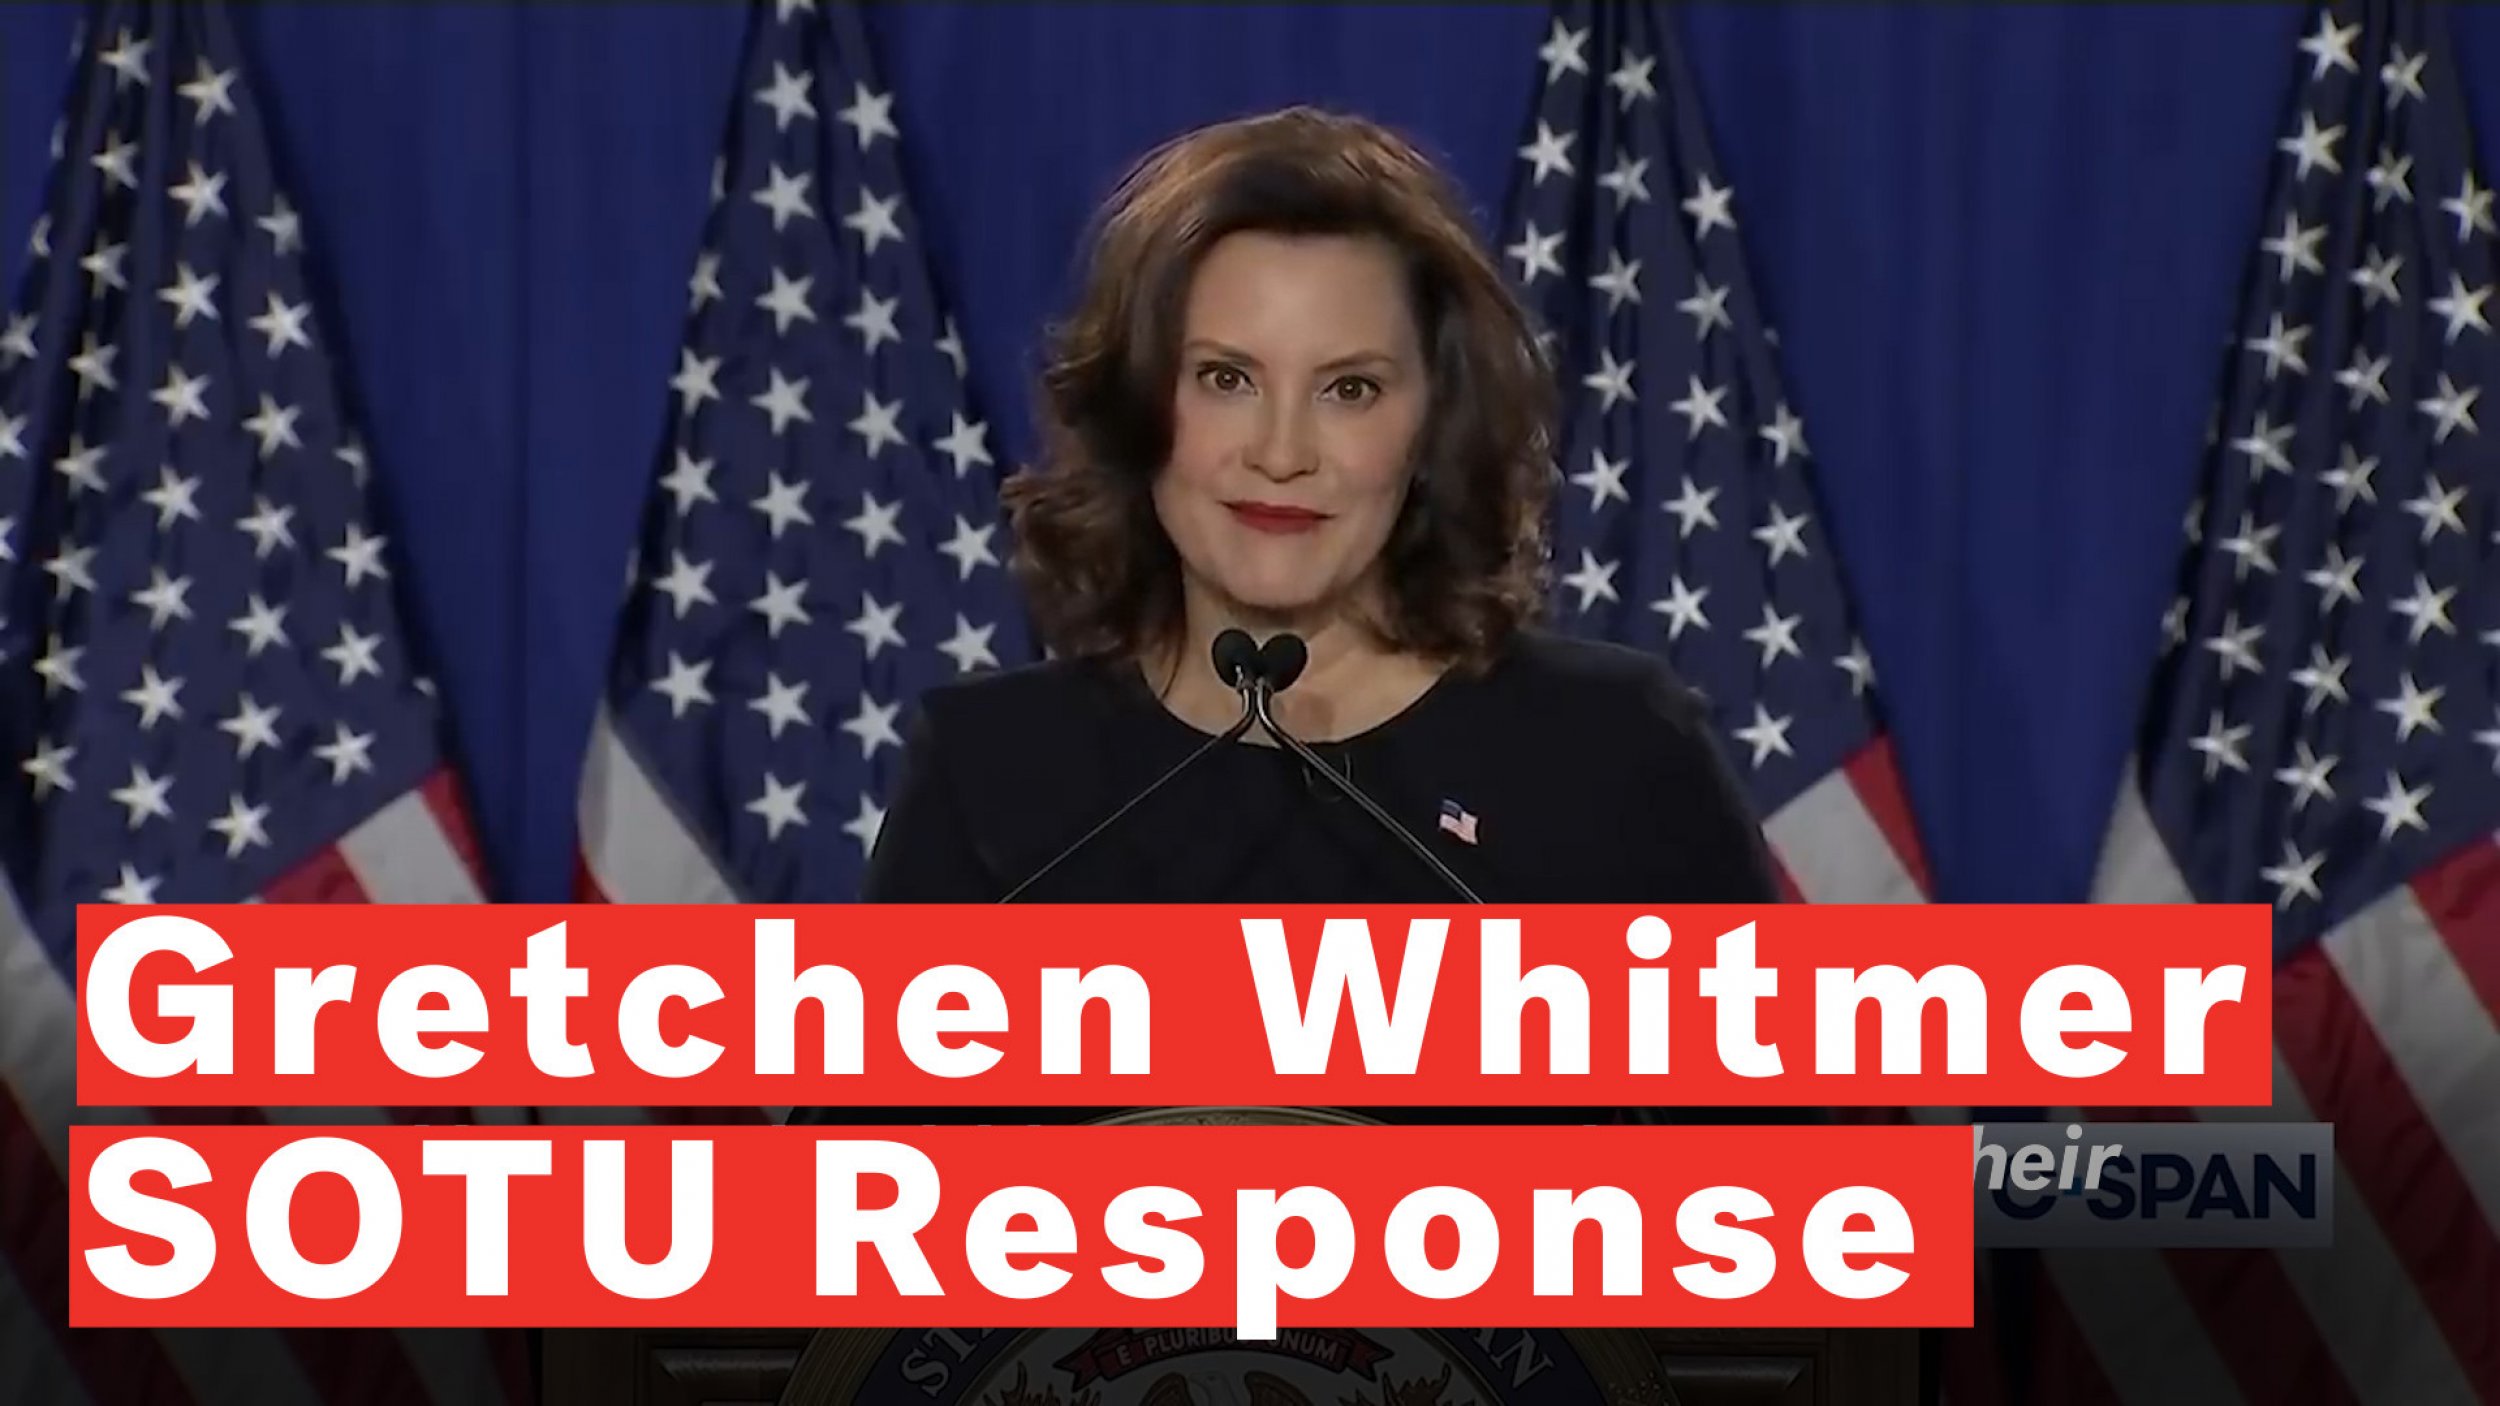 Gov. Gretchen Whitmer Issues Democratic Response To Trumps 2020 SOTU, Rips GOP Over Healthcare